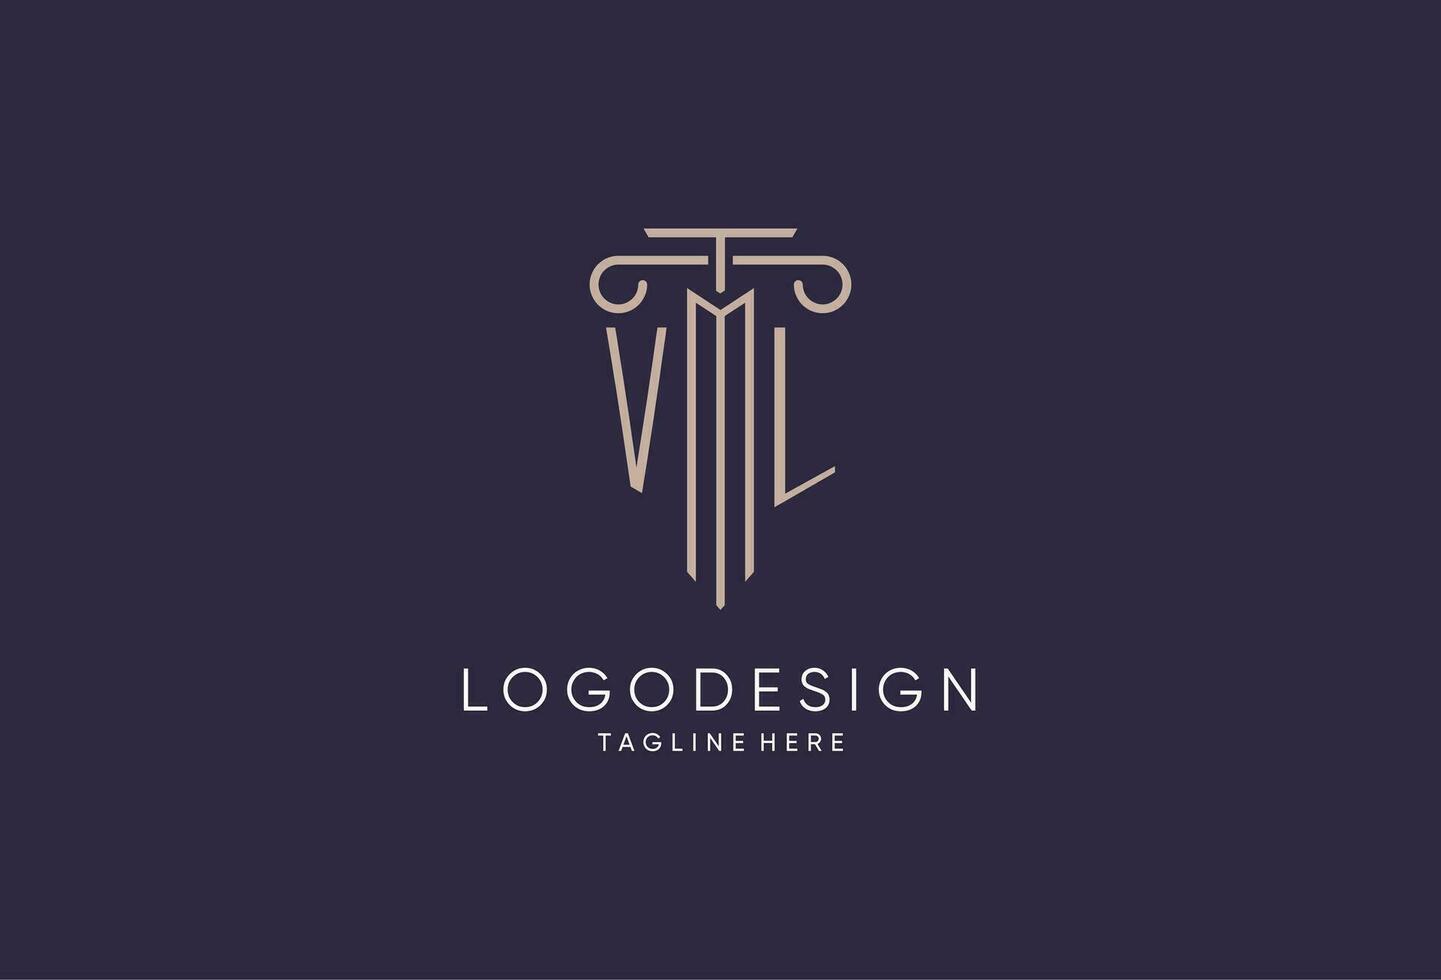 VL logo initial pillar design with luxury modern style best design for legal firm vector